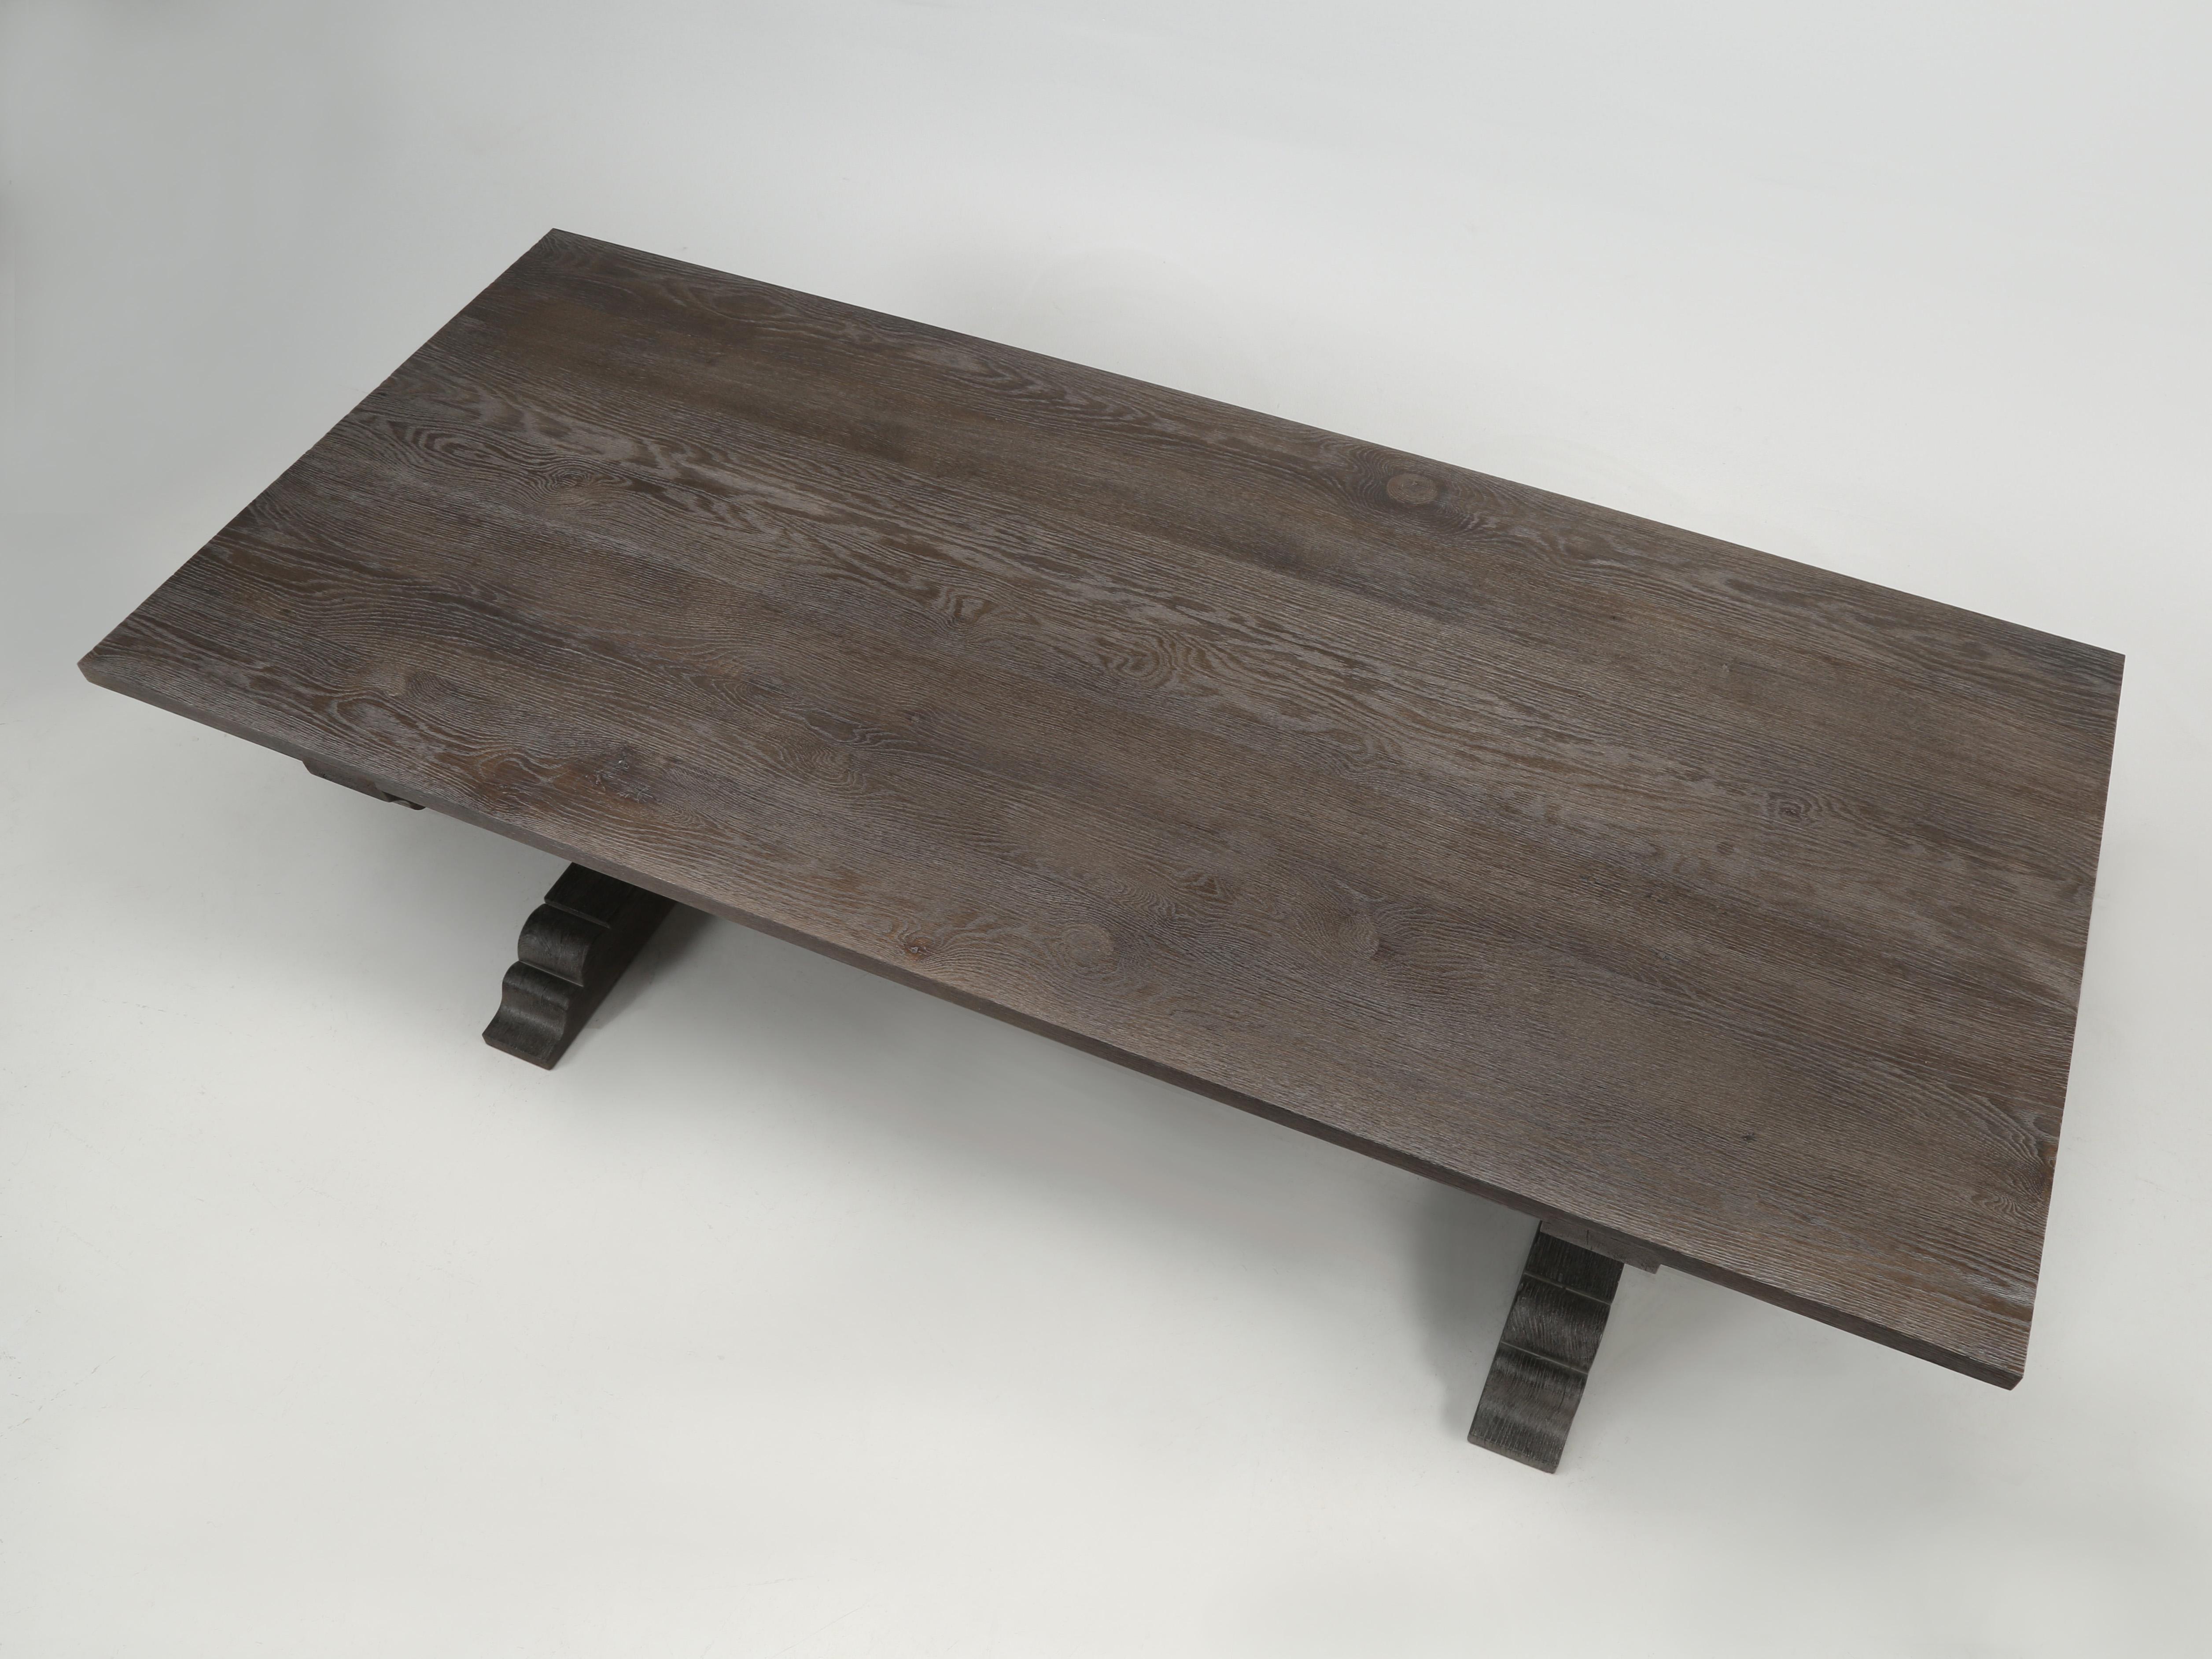 Italian style Farm dining table, or kitchen table with a modern twist, for the finish is a culmination of an old school wire brush technique, followed by hand-sanding and then both processes are repeated. The results speak for themselves, but the